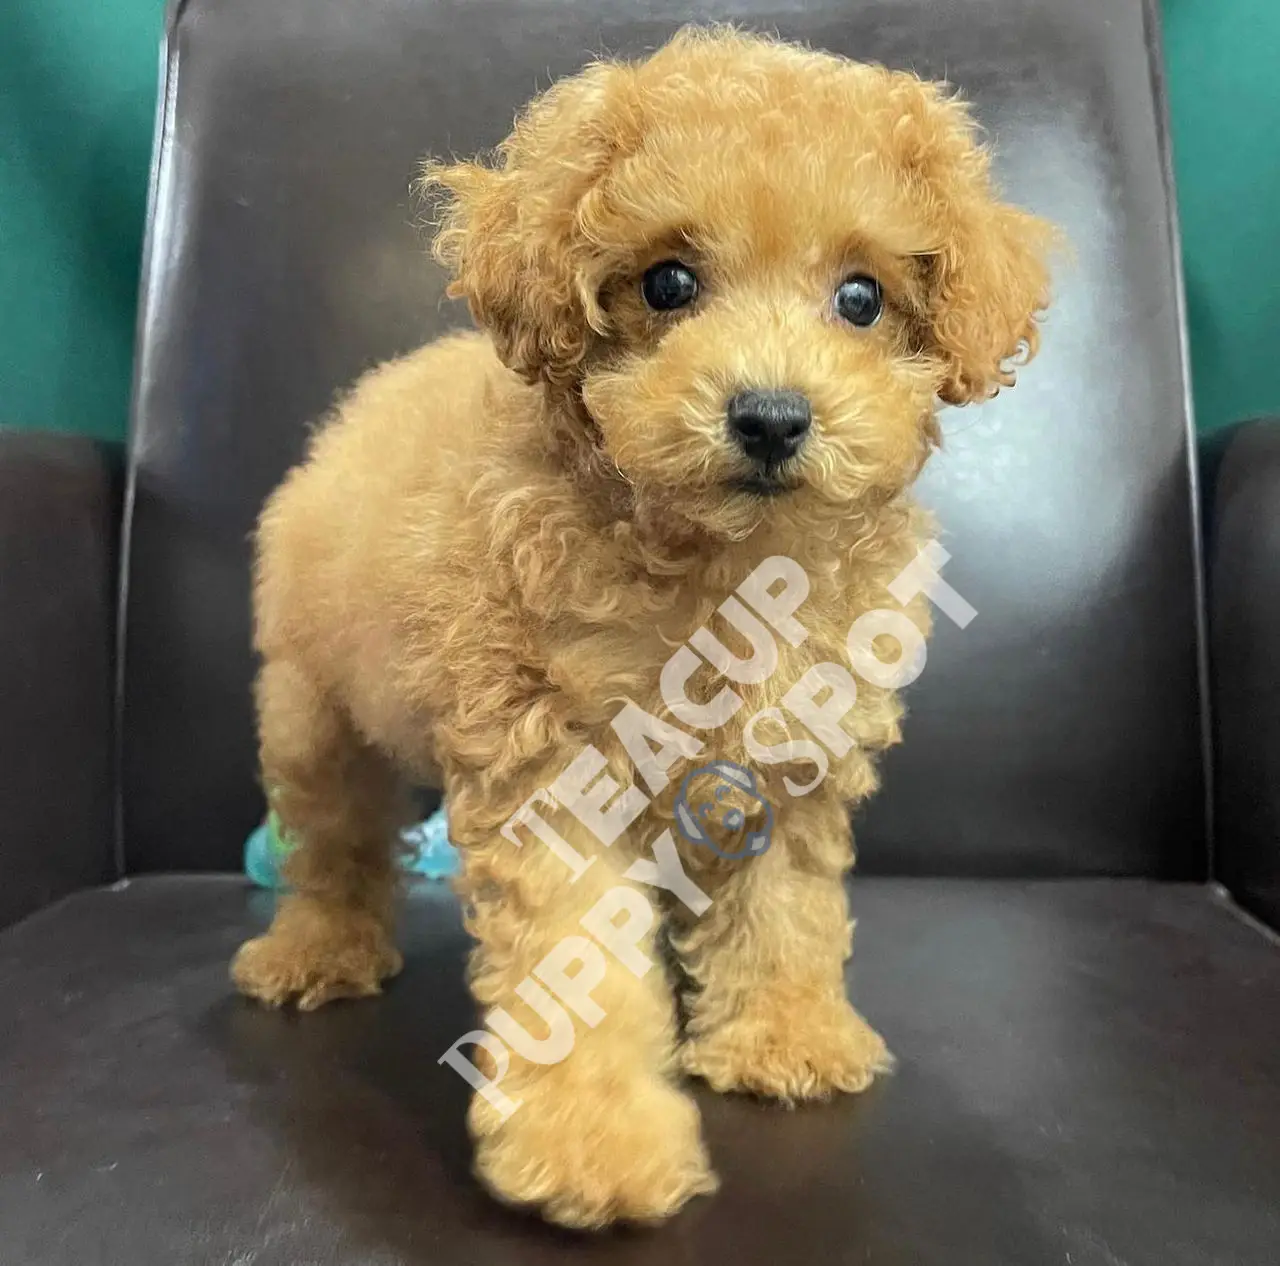 Brands » Teacup dogs for sale/Teacup puppies for sale/Teacup puppy for sale - Teacup dogs for sale/Teacup puppies for sale/Teacup puppy for sale